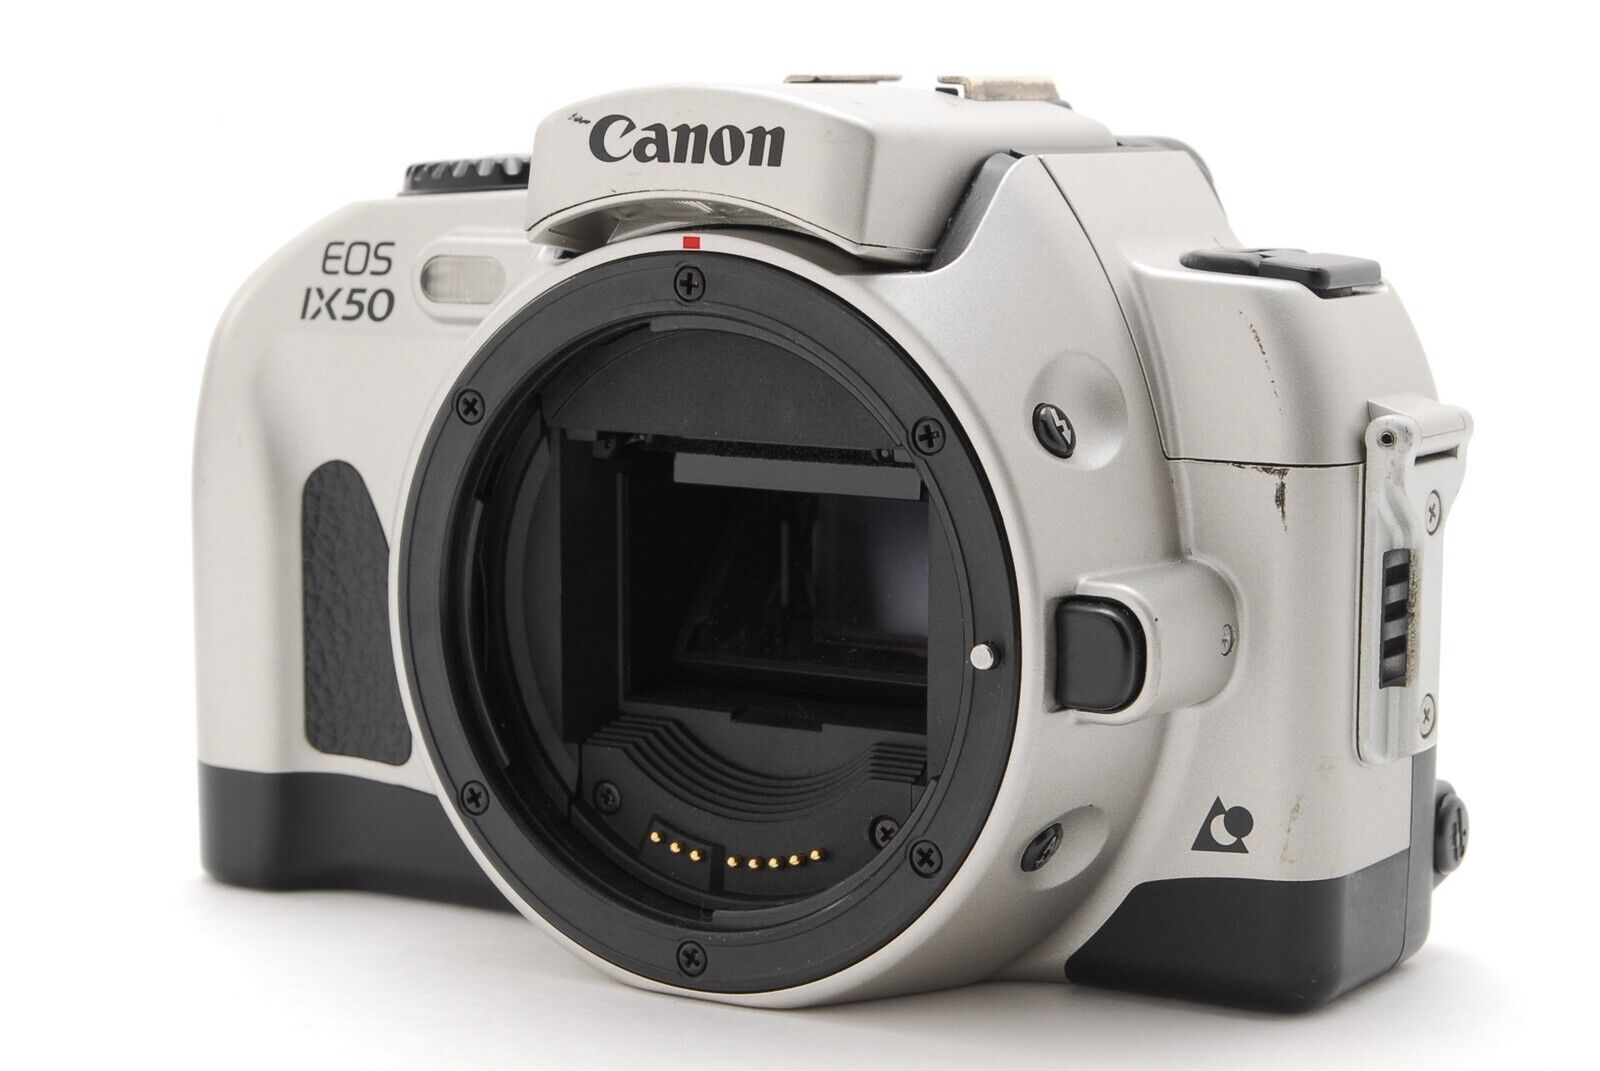 [Excellent] Canon EOS IX50 SLR 35mm film camera Body Only from Japan  #b010106